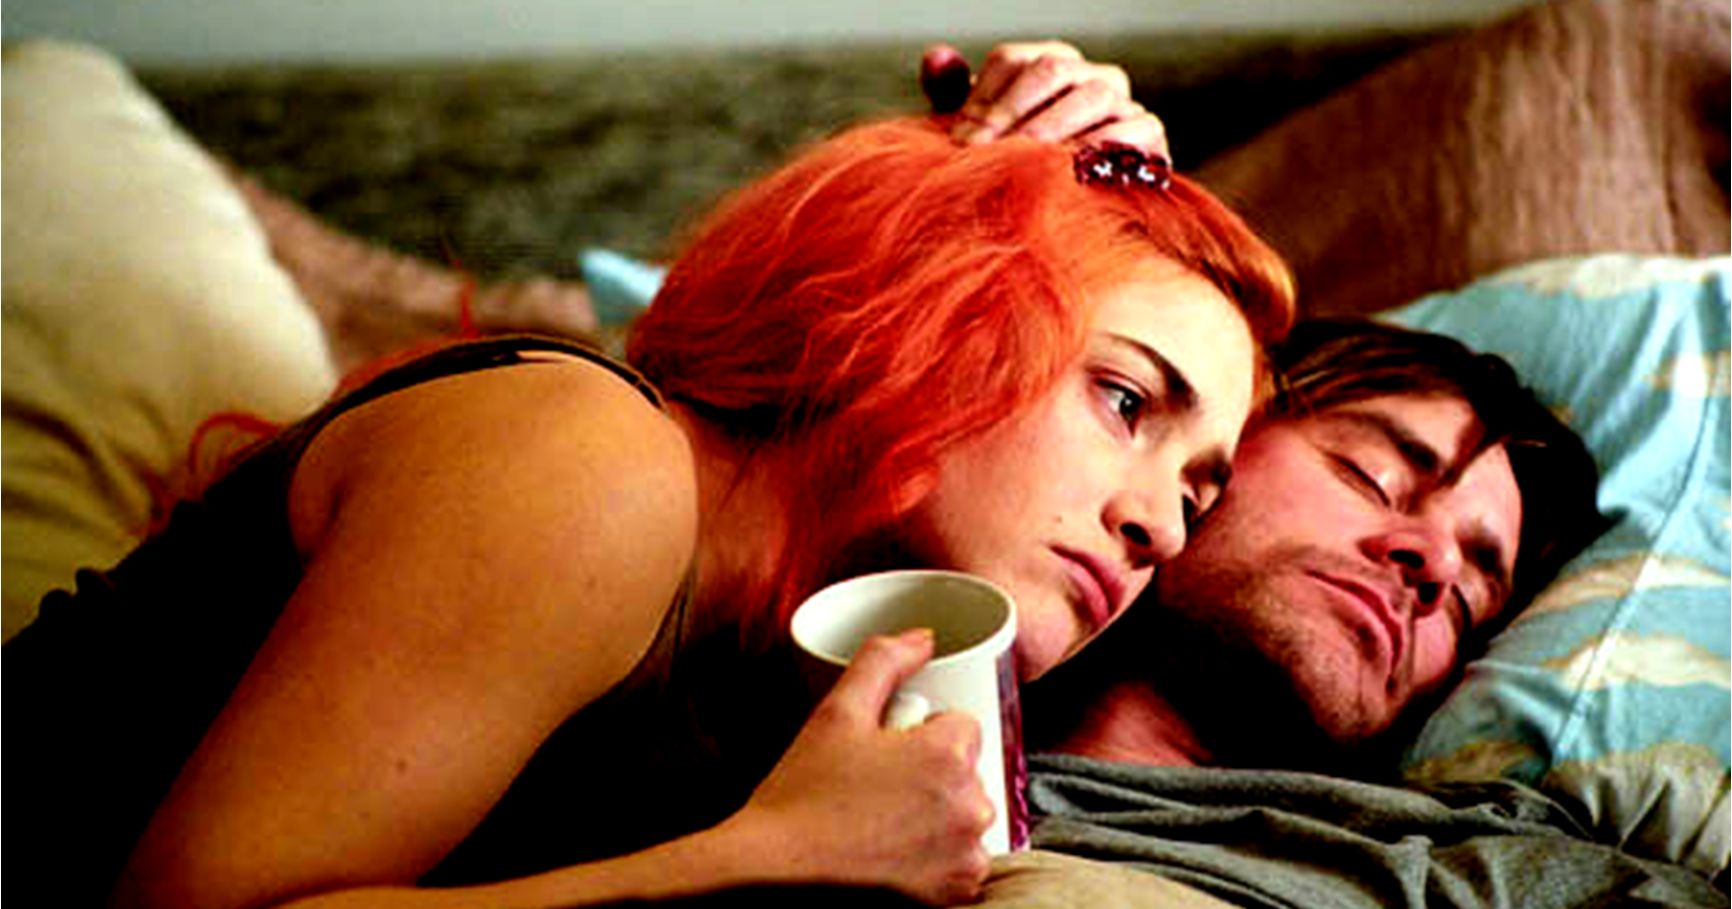 jim carrey and kate winslet movie